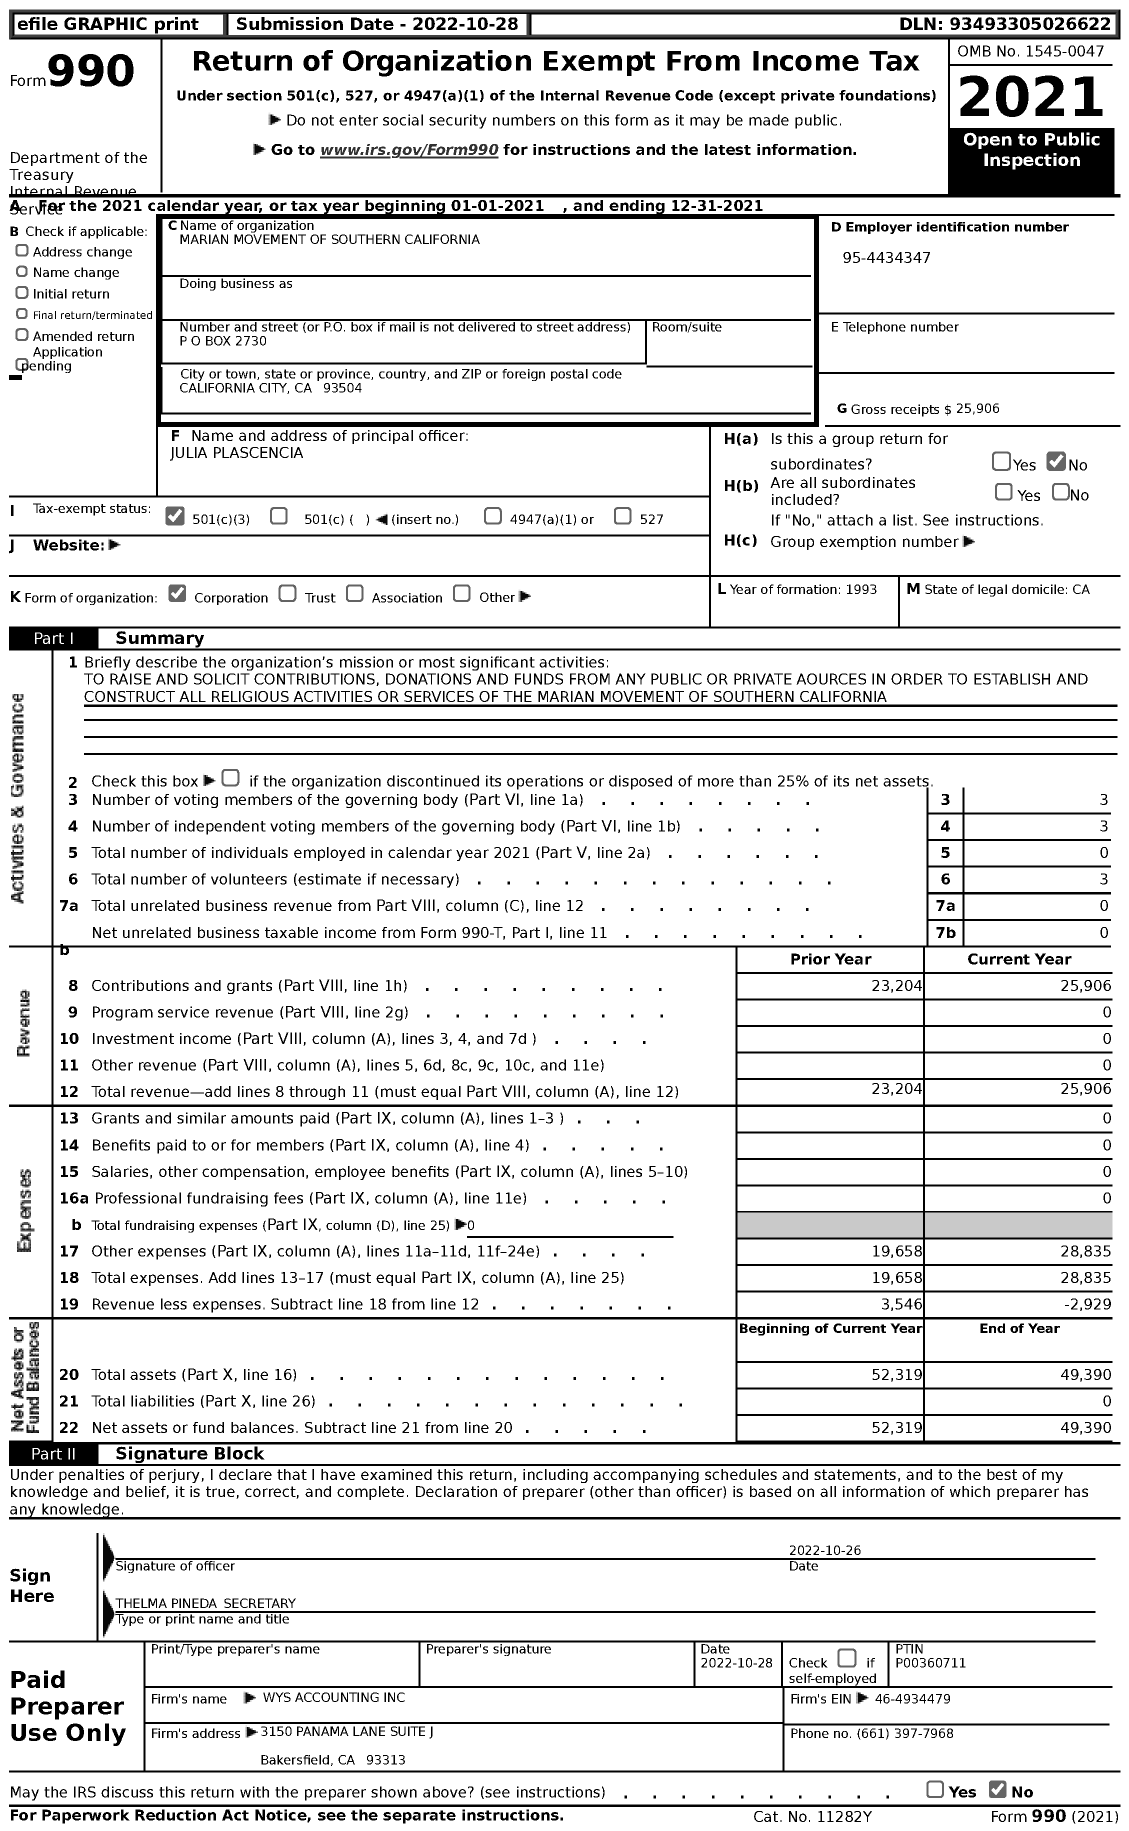 Image of first page of 2021 Form 990 for Marian Movement of Southern California